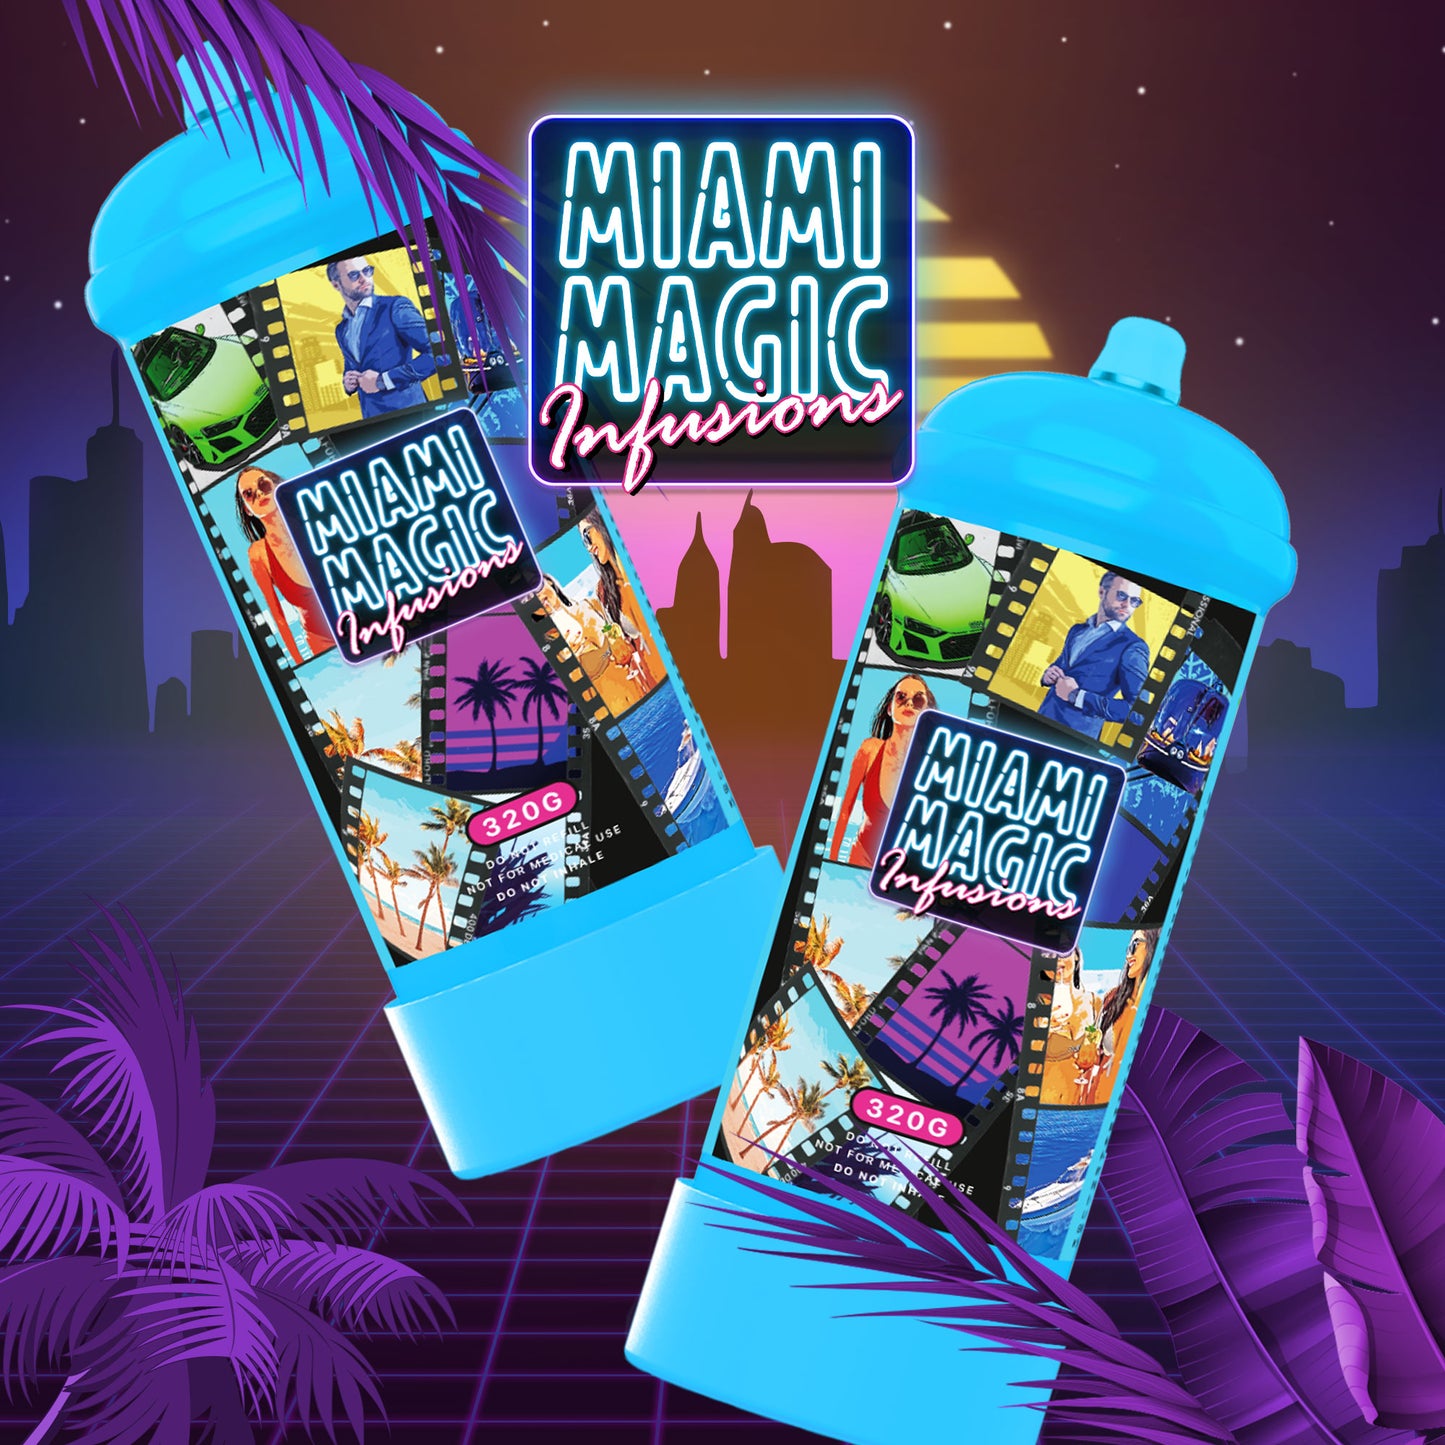 Miami Magic Infusions 320g Canister